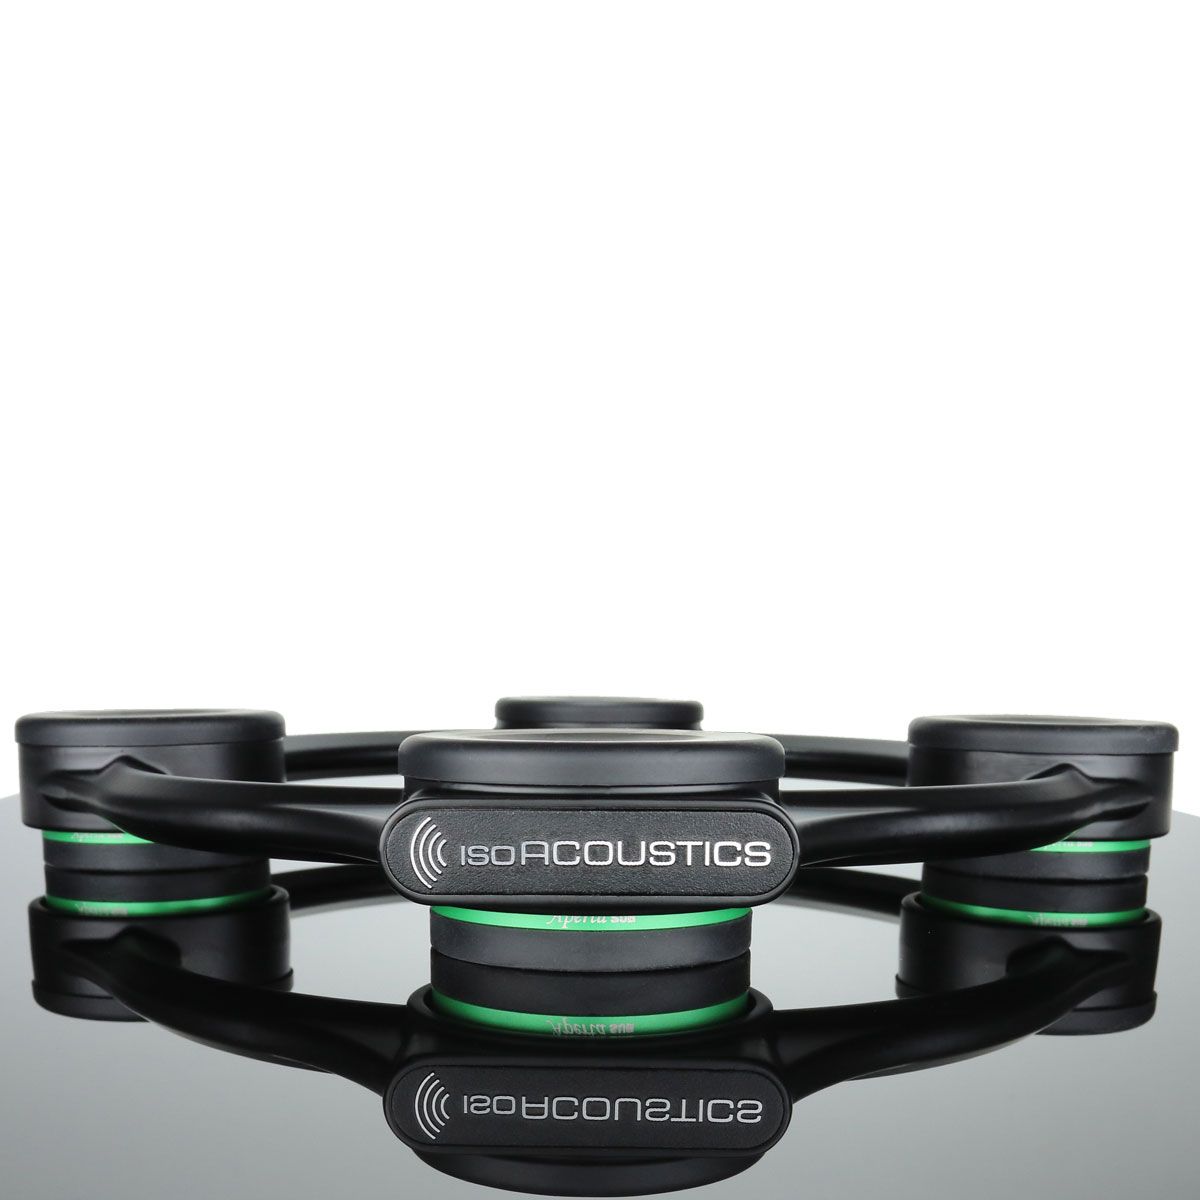 IsoAcoustics Aperta Sub Subwoofer Isolation Stand, on dark glass surface